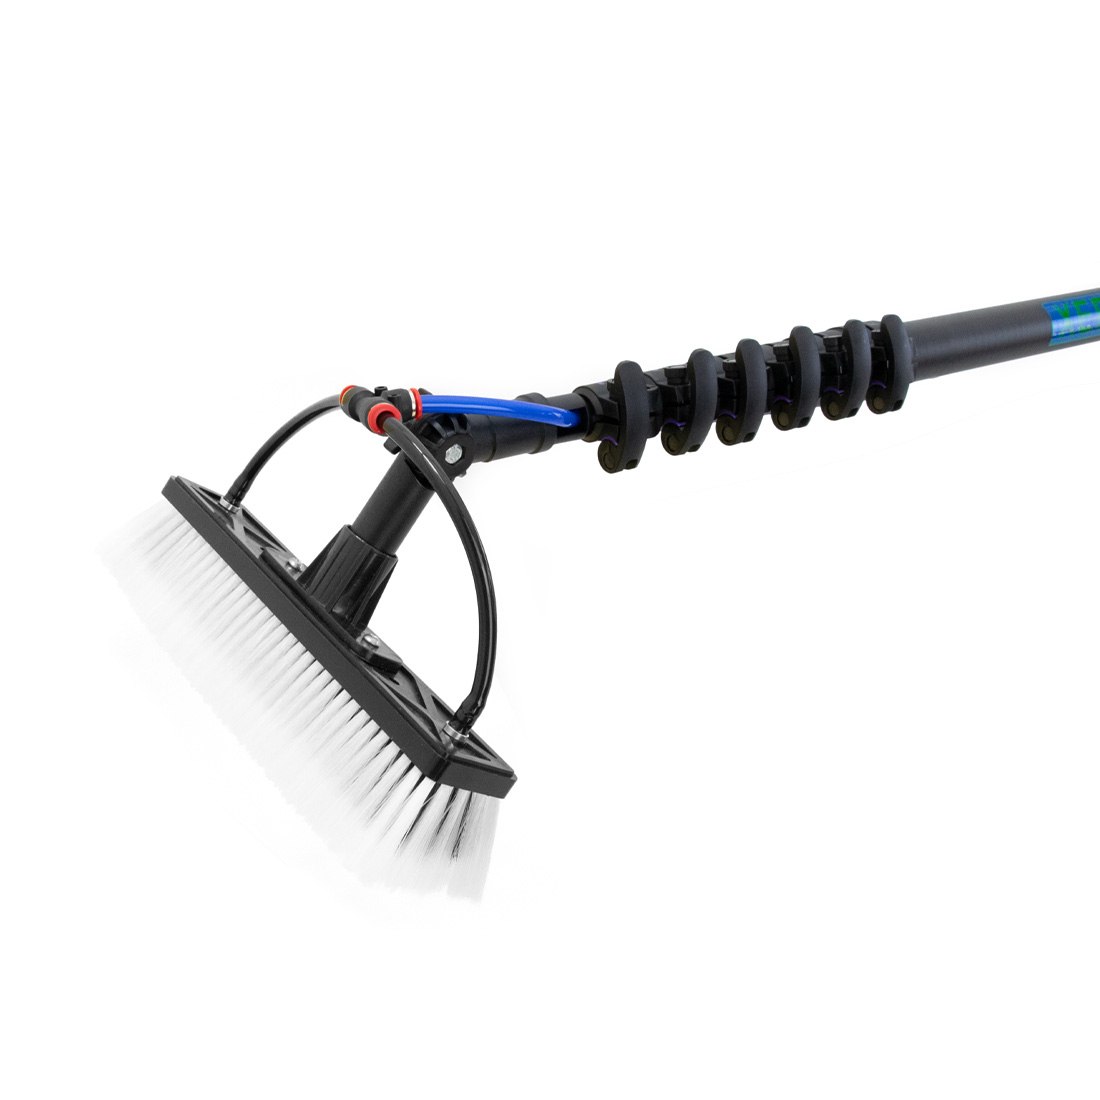 XERO M9 Water Fed Pole - Top Brush and Clamp View